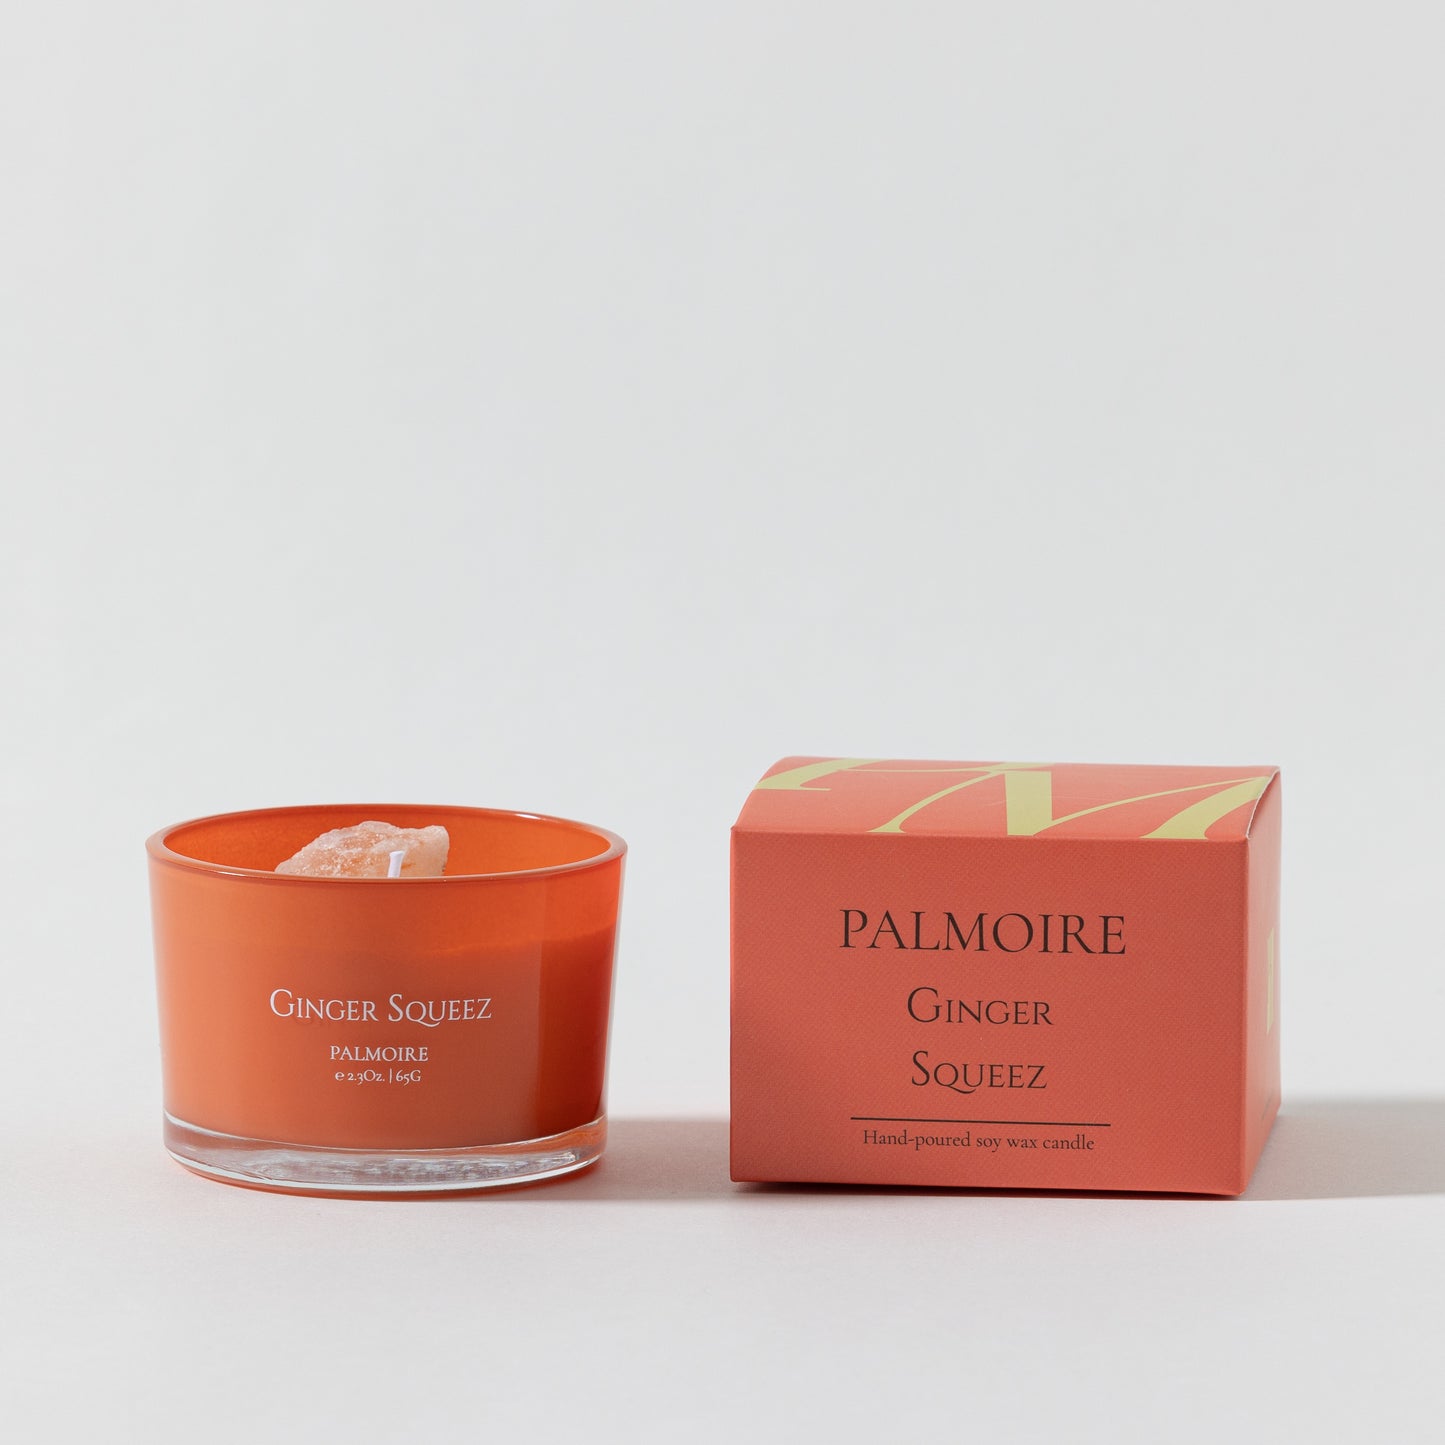 Ginger Squeez Soy Wax Candle - PALMOIRE